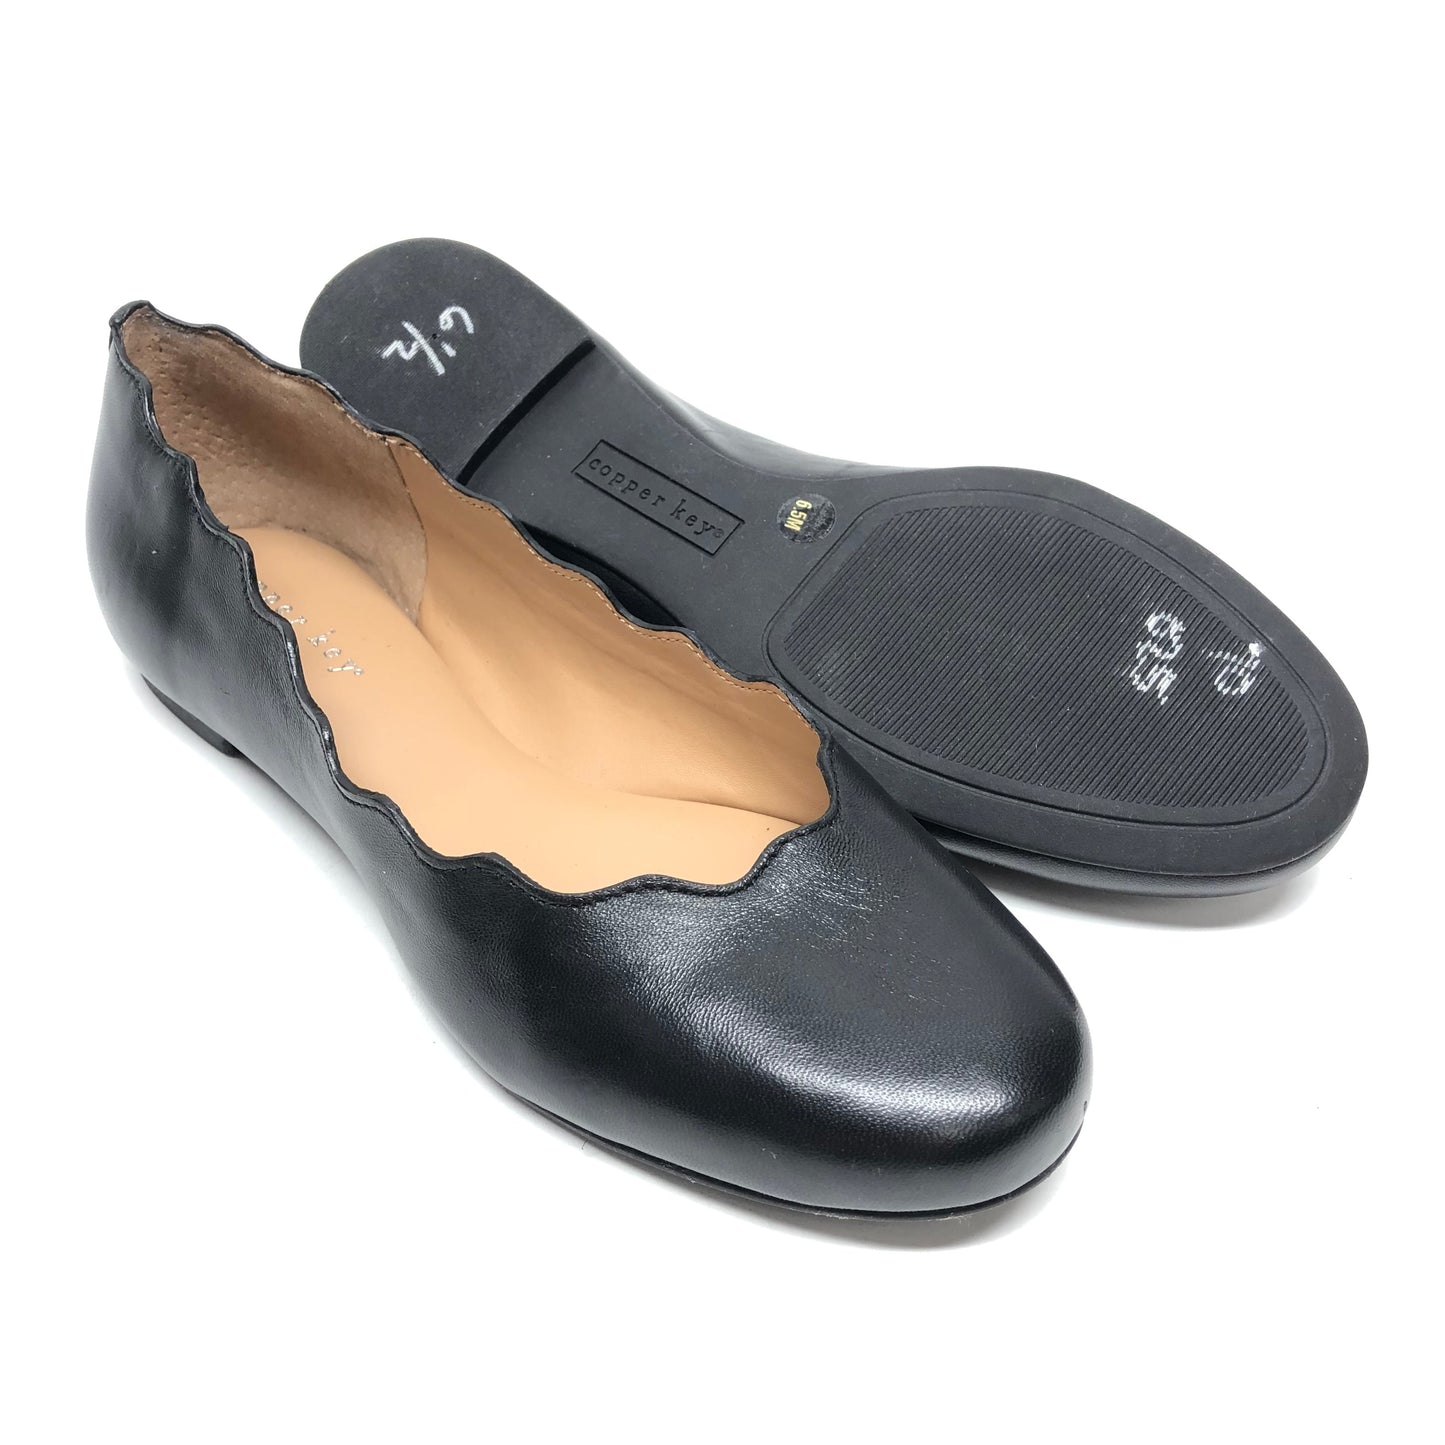 Shoes Flats By Copper Key  Size: 6.5